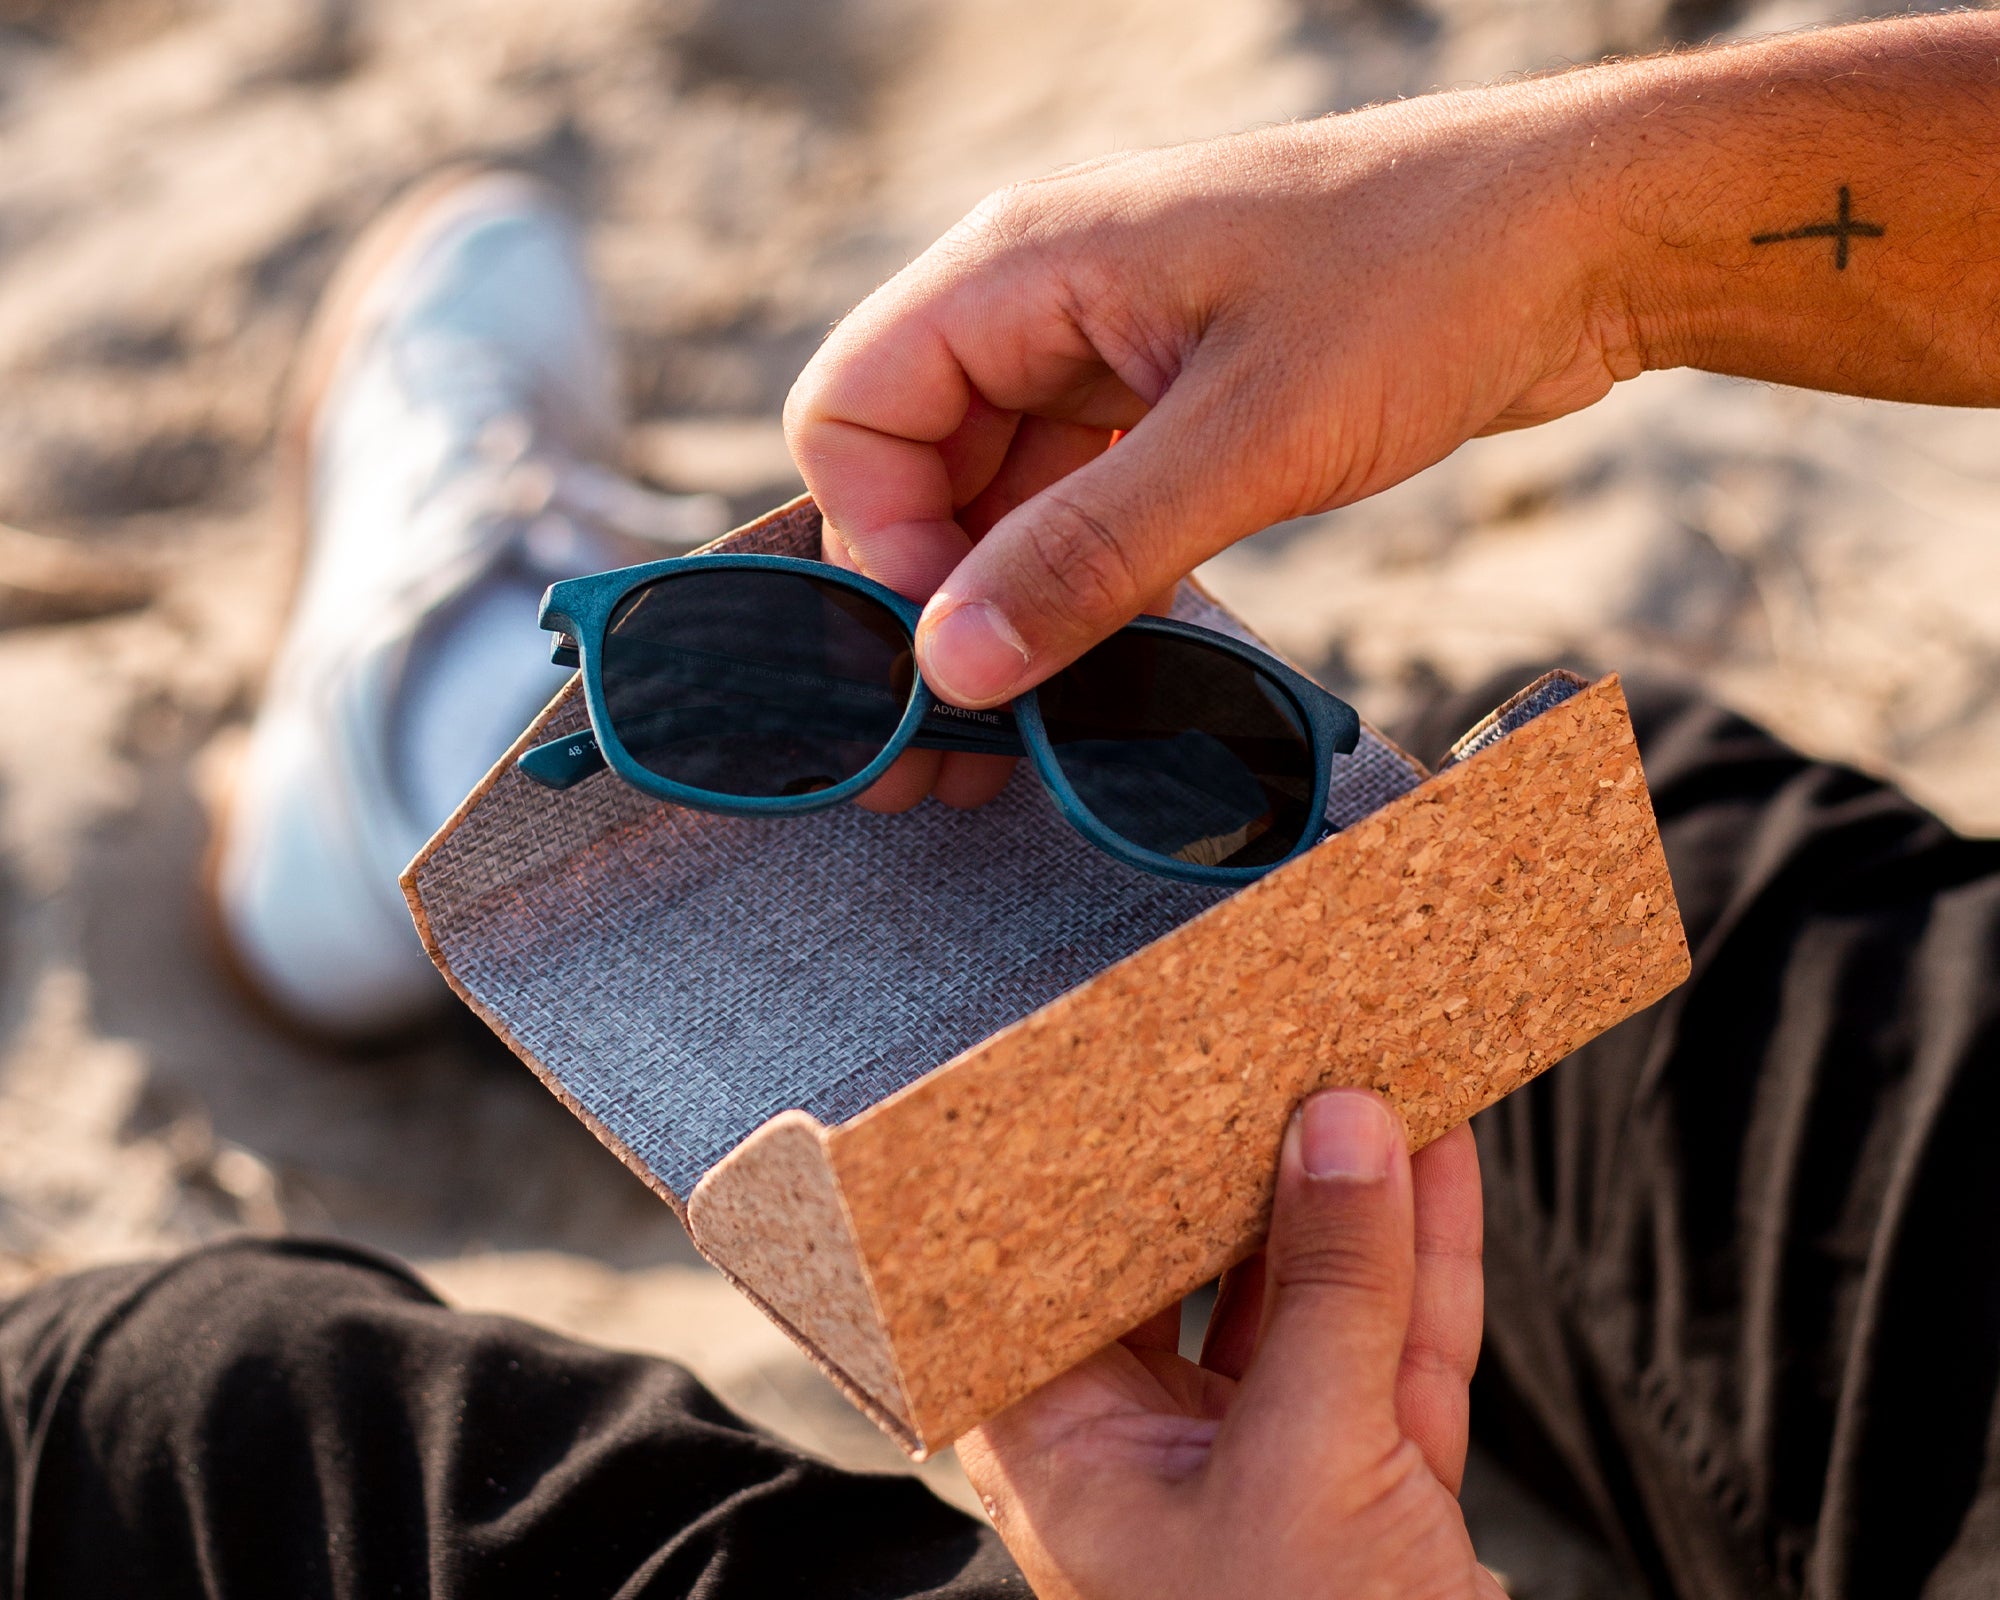 hand picking up waterhaul kynance navy recycled sunglasses out of cork folding sunglasses case